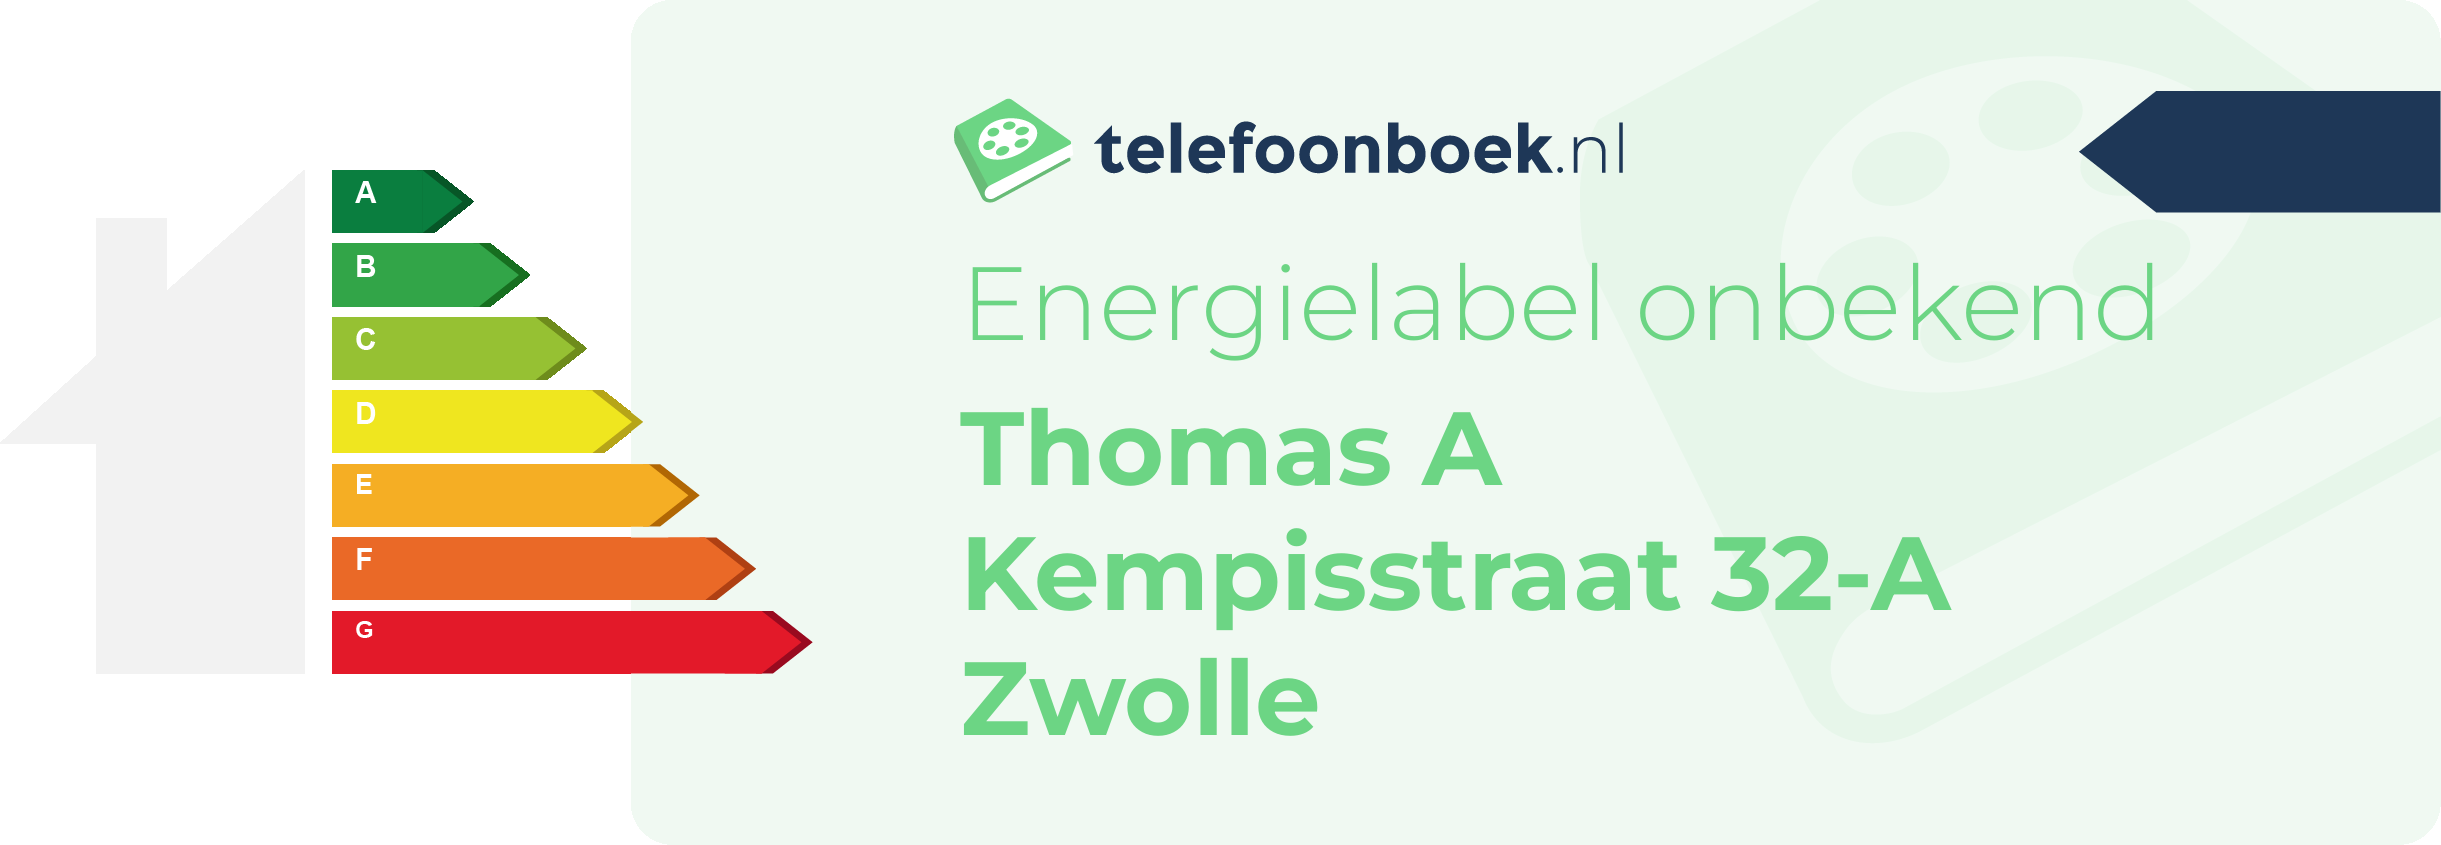 Energielabel Thomas A Kempisstraat 32-A Zwolle